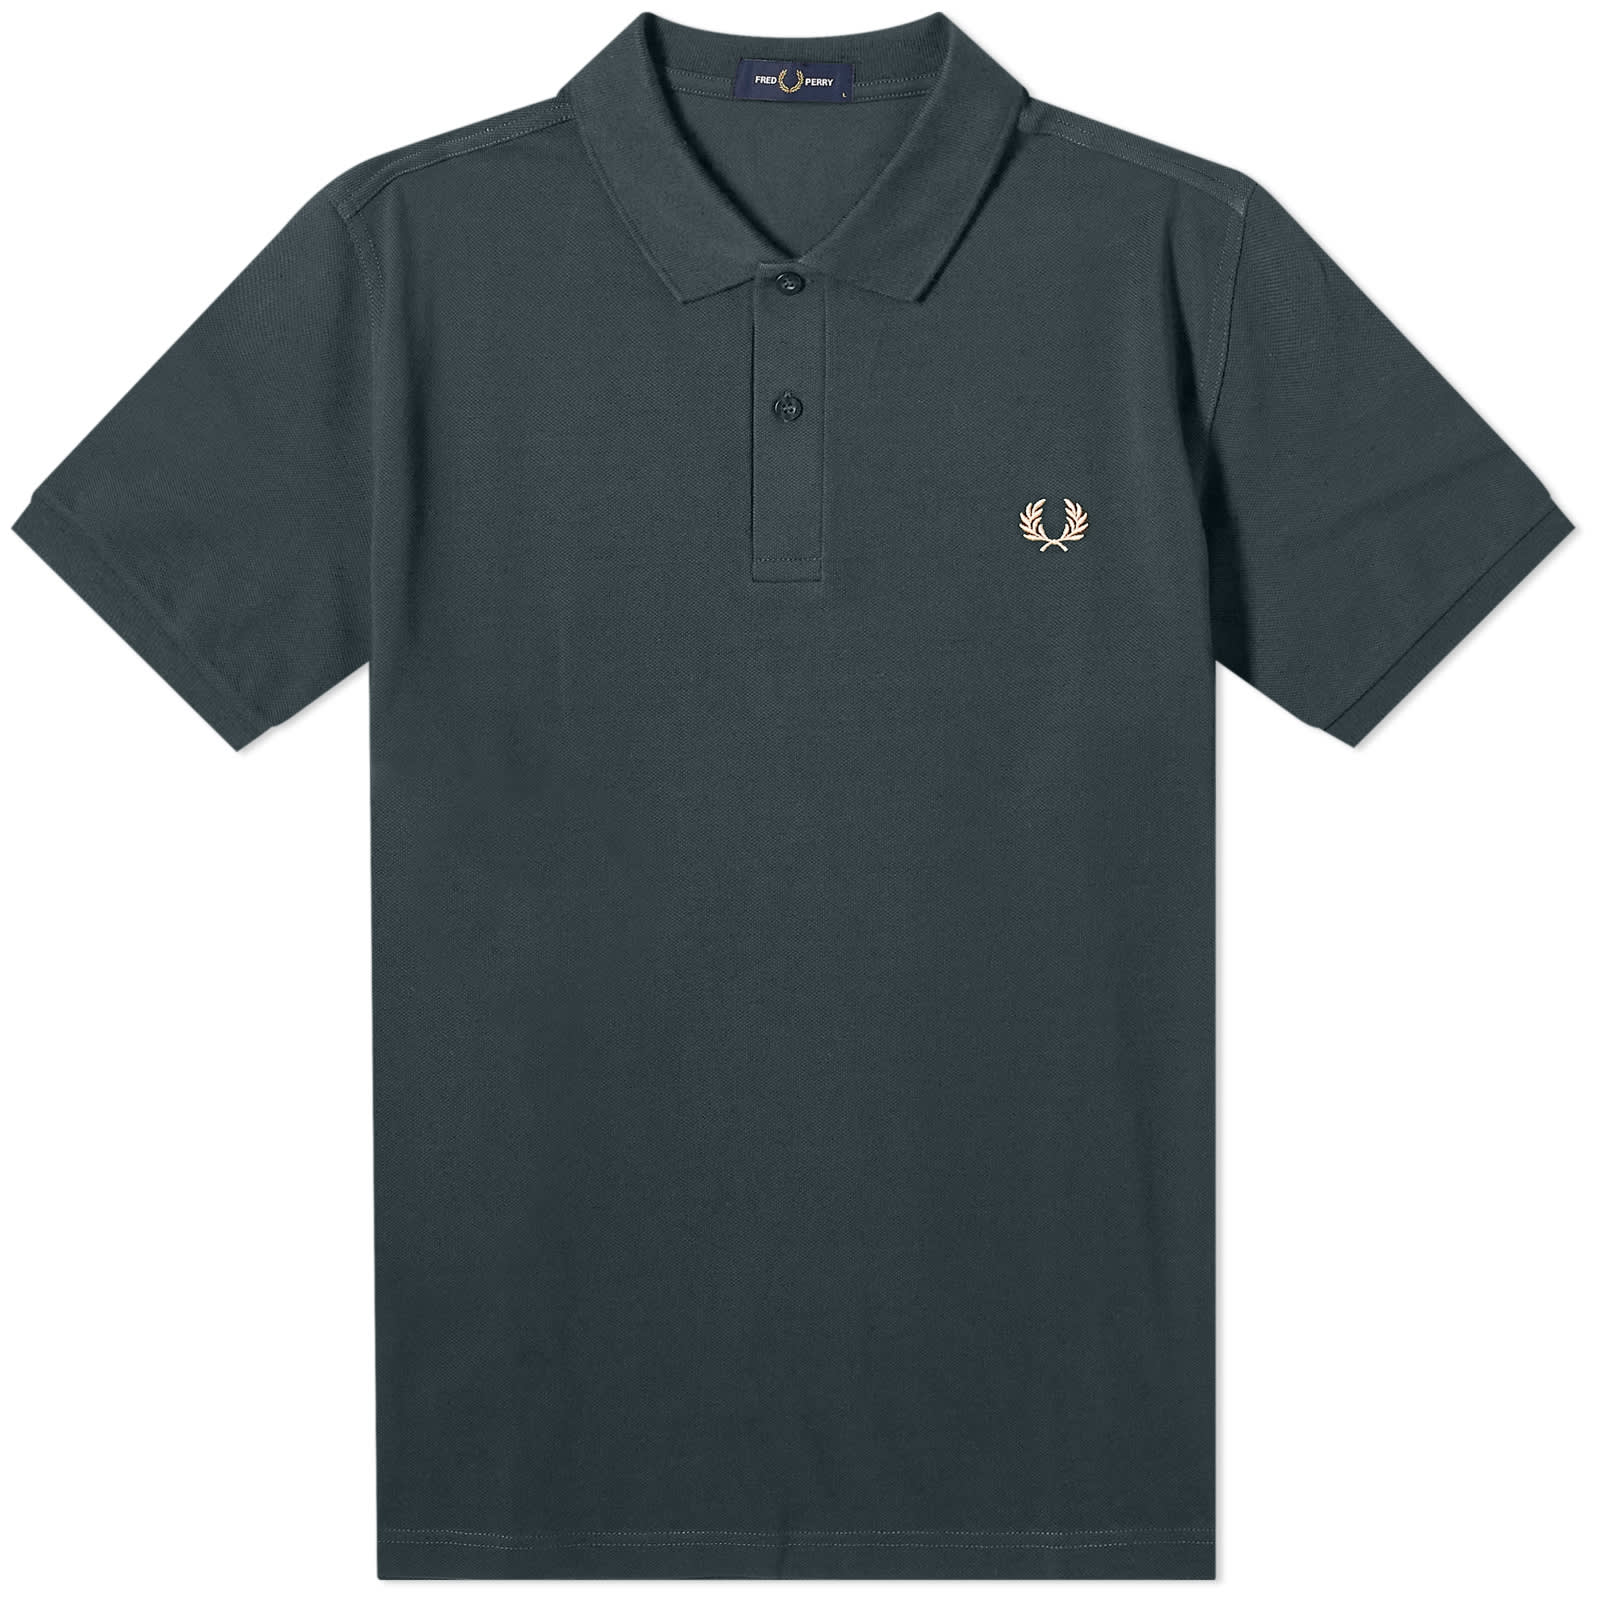 Поло Fred Perry Plain, цвет Night Green рубашка fred perry panel polo цвет whisky brown